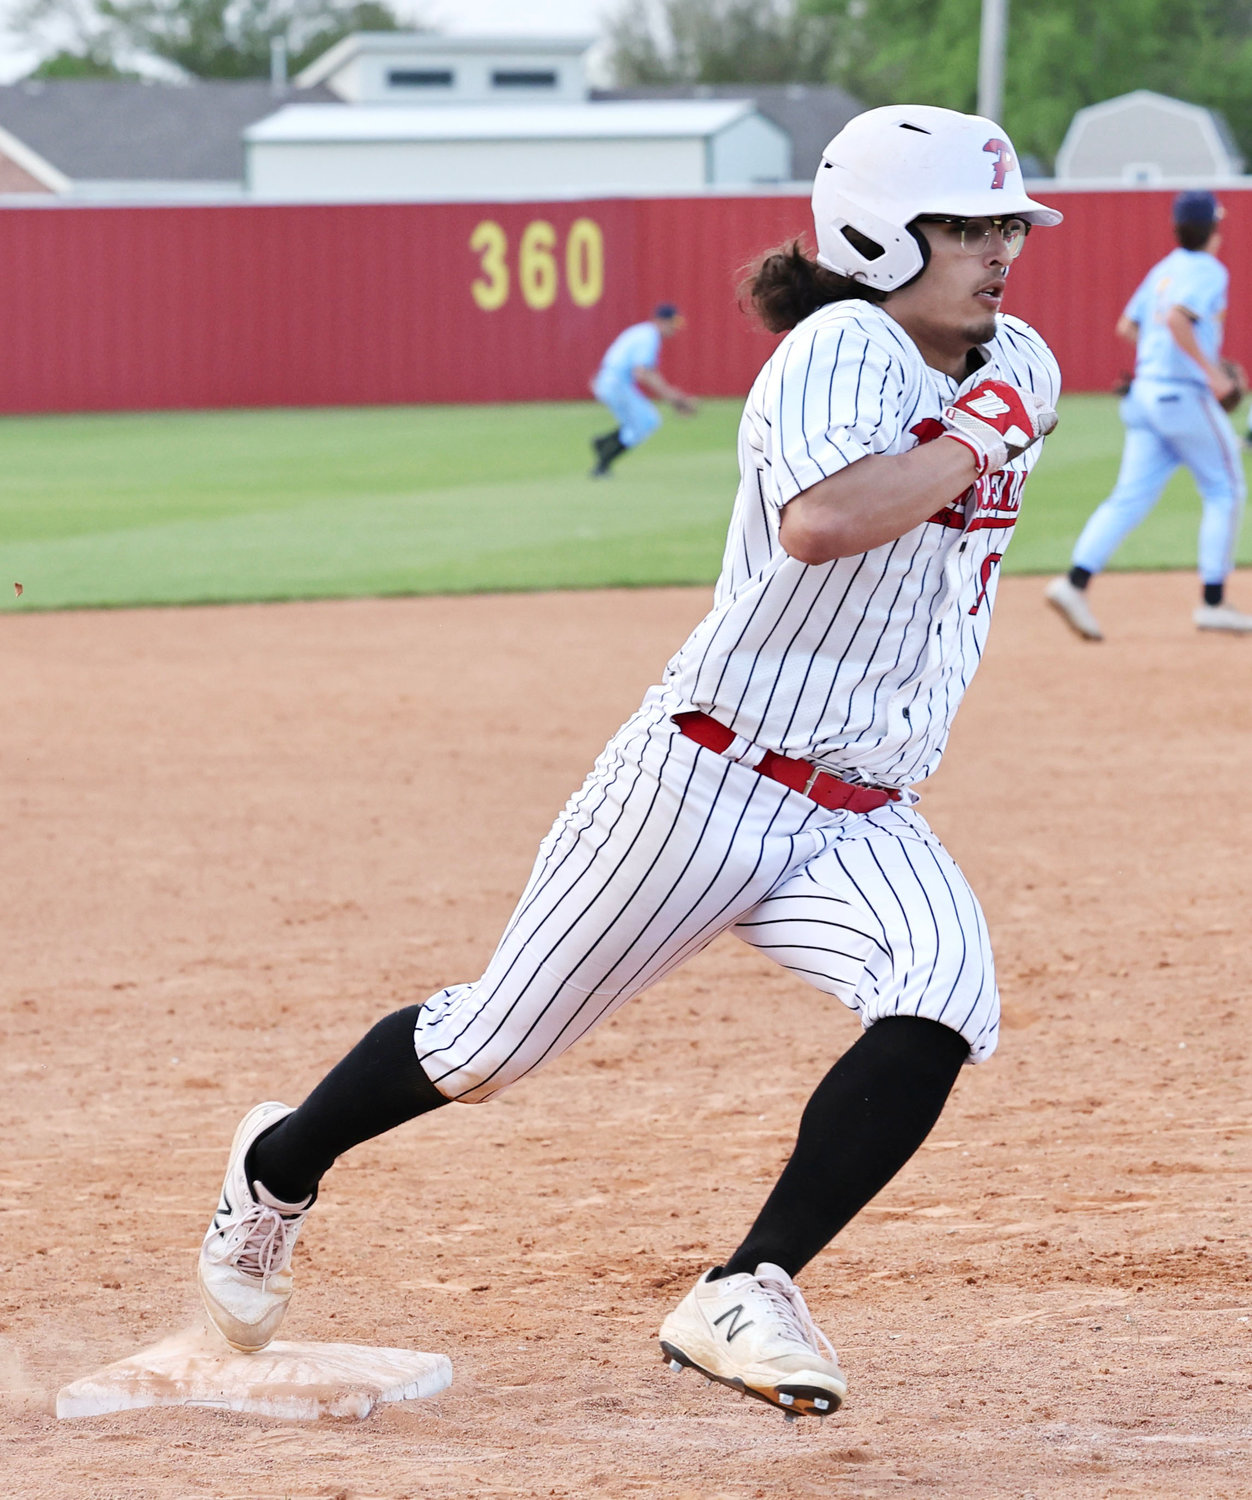 Purcell senior Logan Roberts scores a run in the fourth inning against Holdenville after Cole Smedley drove him in. The Dragons defeated the Wolverines 14-4.